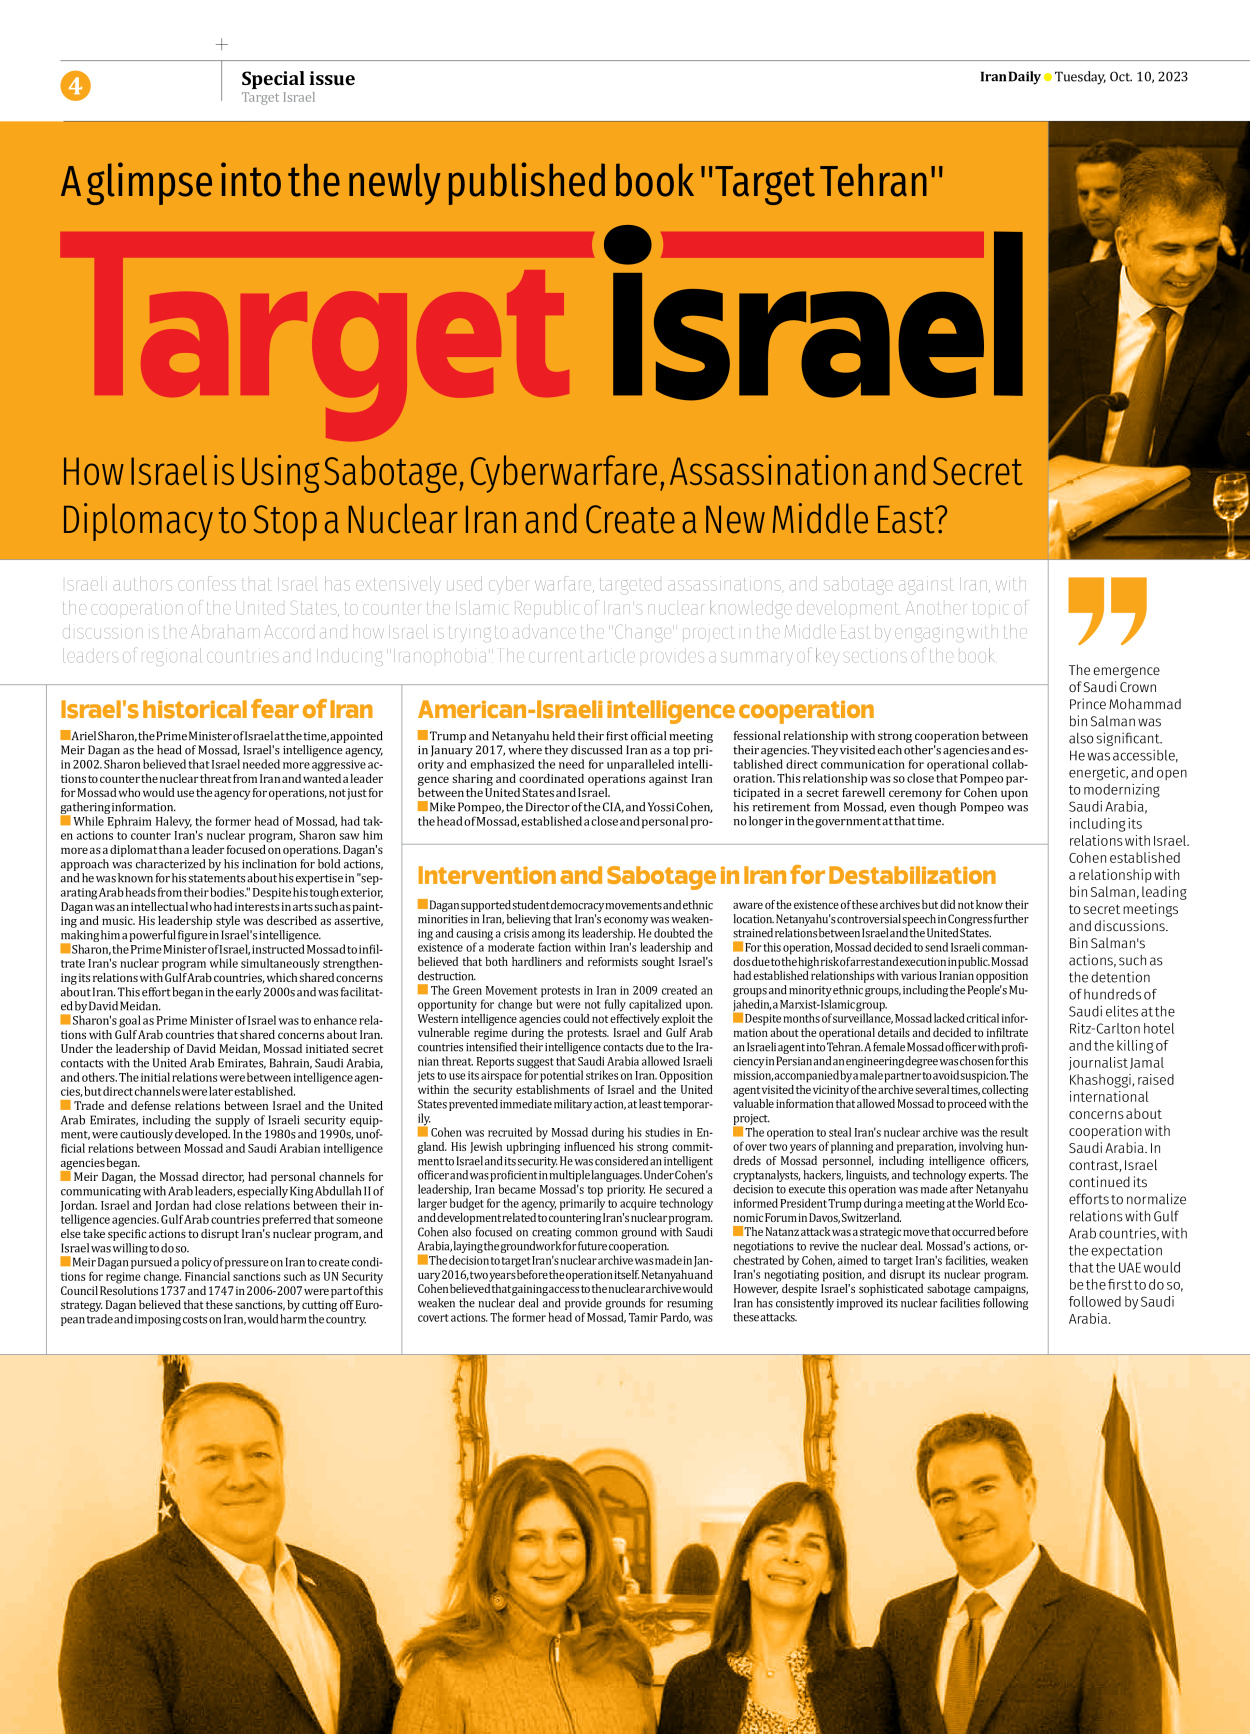 Iran Daily - Number Seven Thousand Four Hundred and Four - 10 October 2023 - Page 4